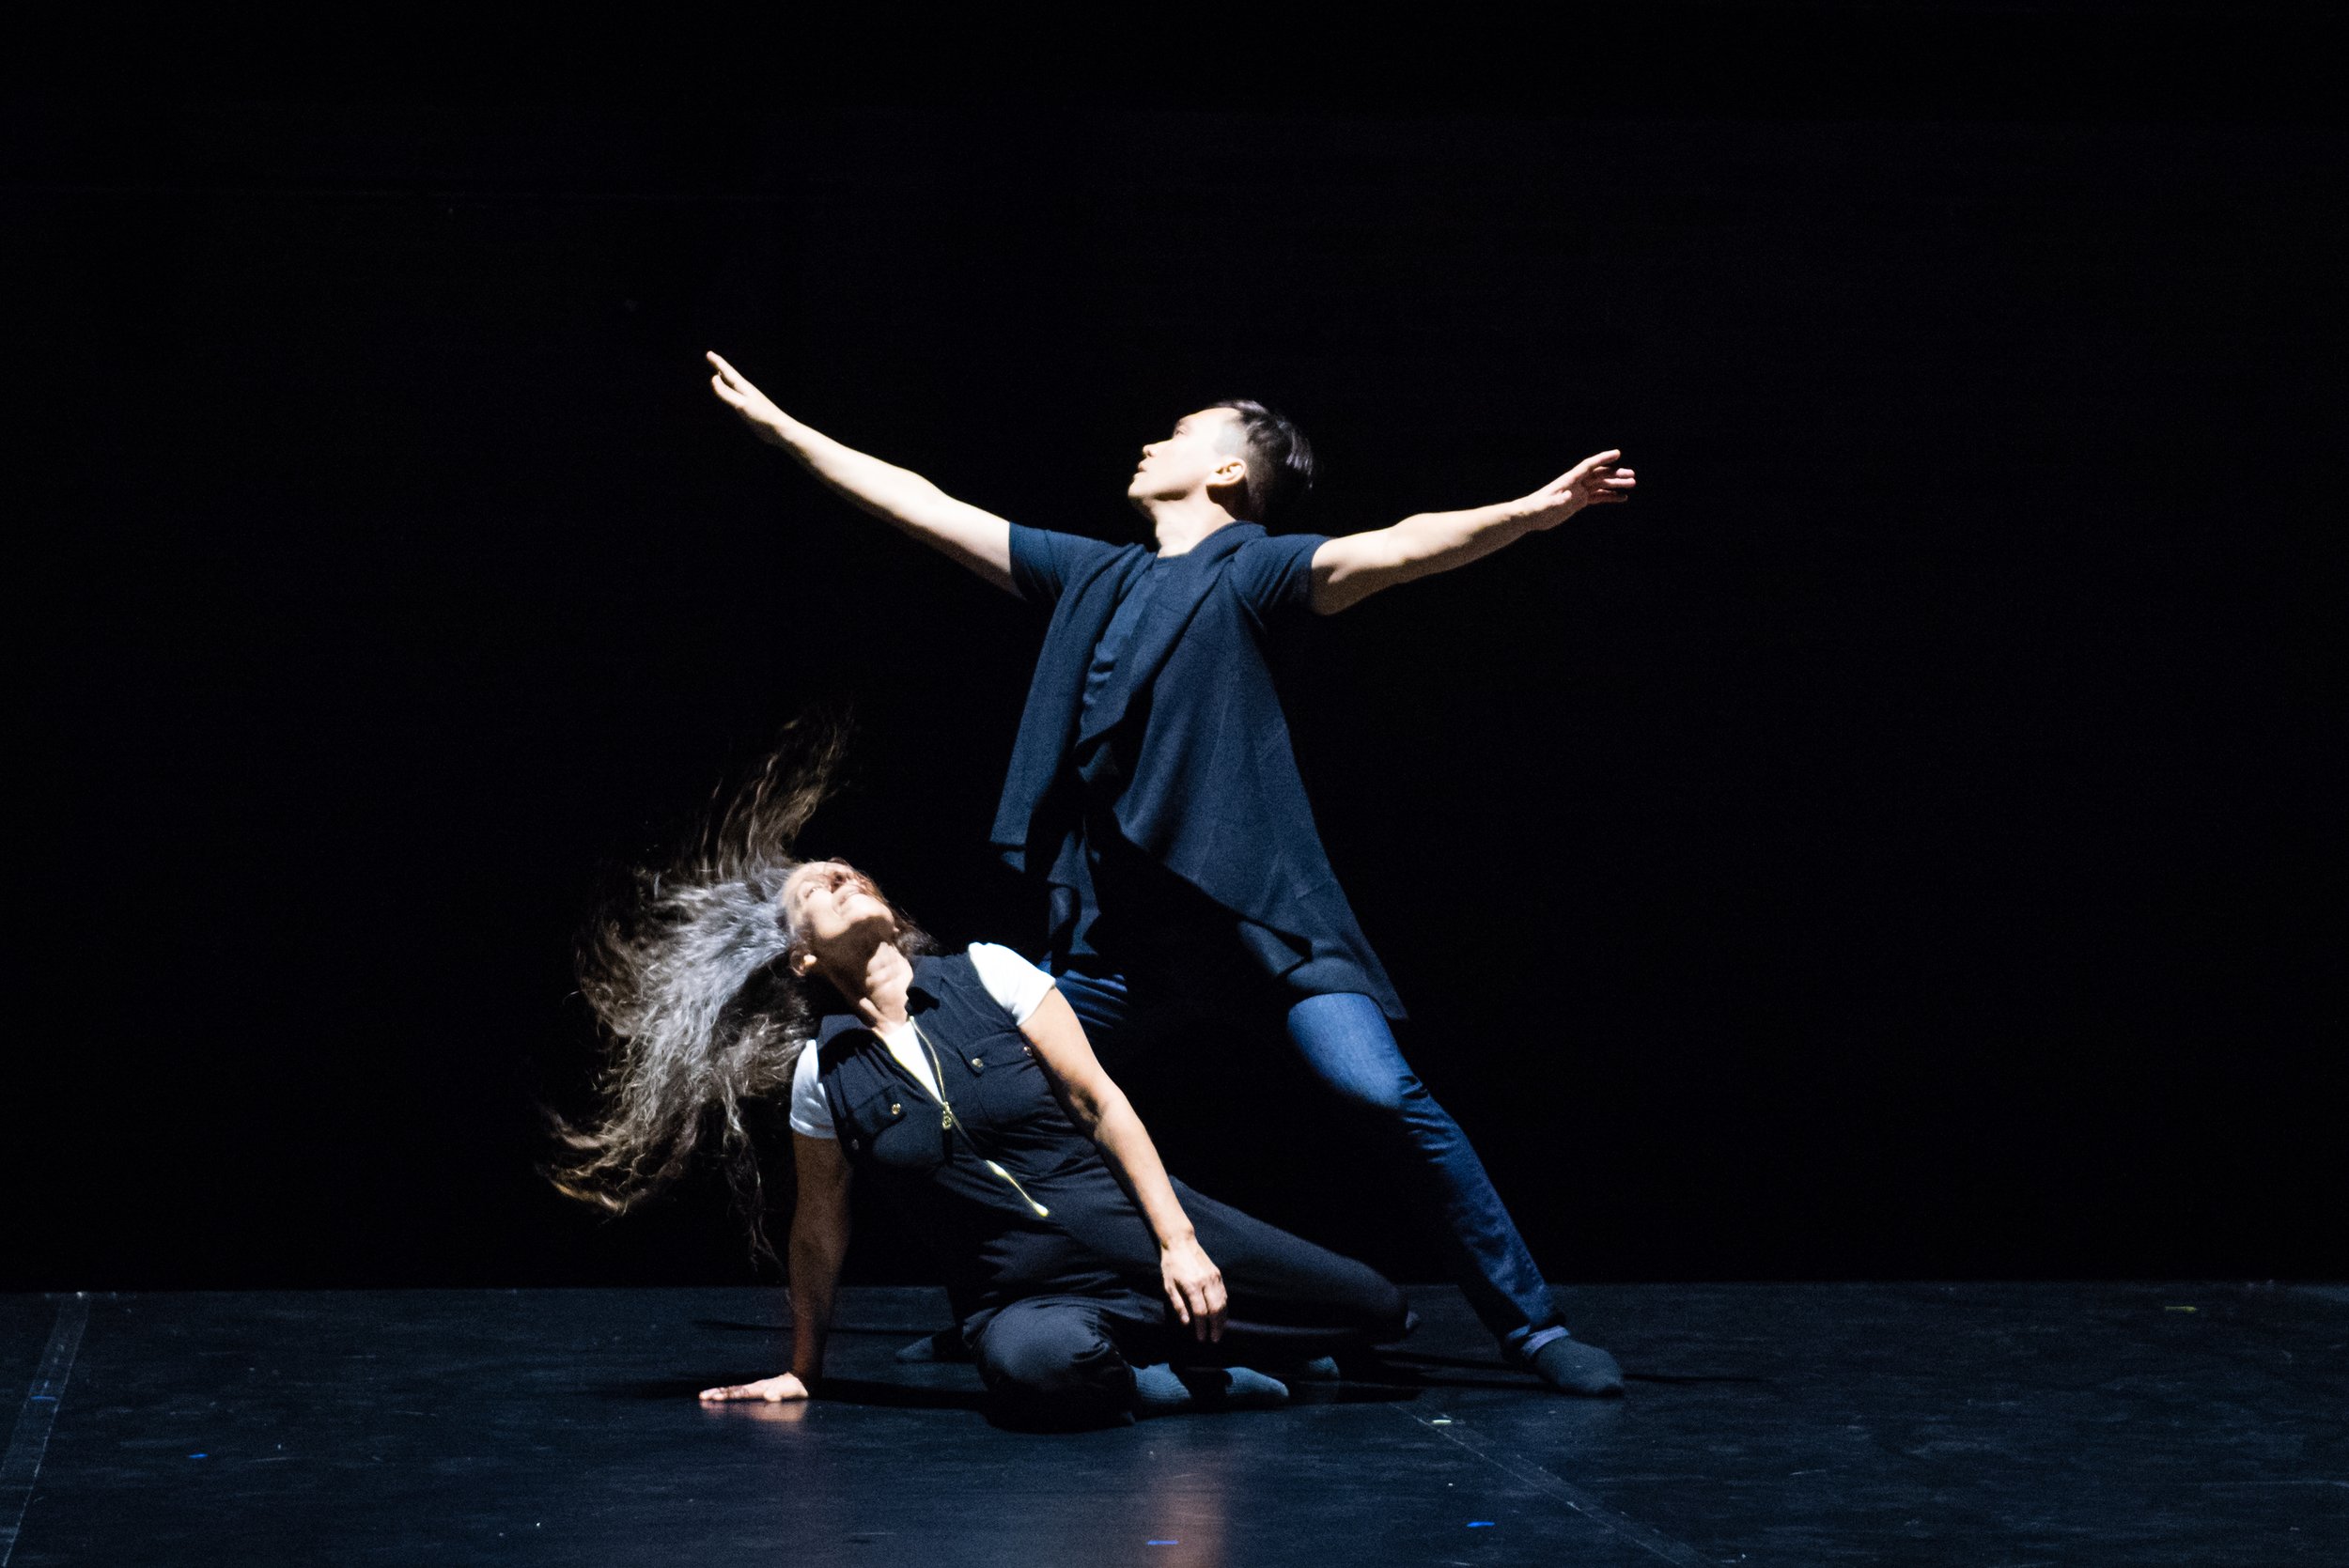  Karen Kaeja kneels on the floor with one hand bracing her and her hair flying out to one side. Michael Caldwell stands directly over her with his legs wide and his arms extended to either side. 